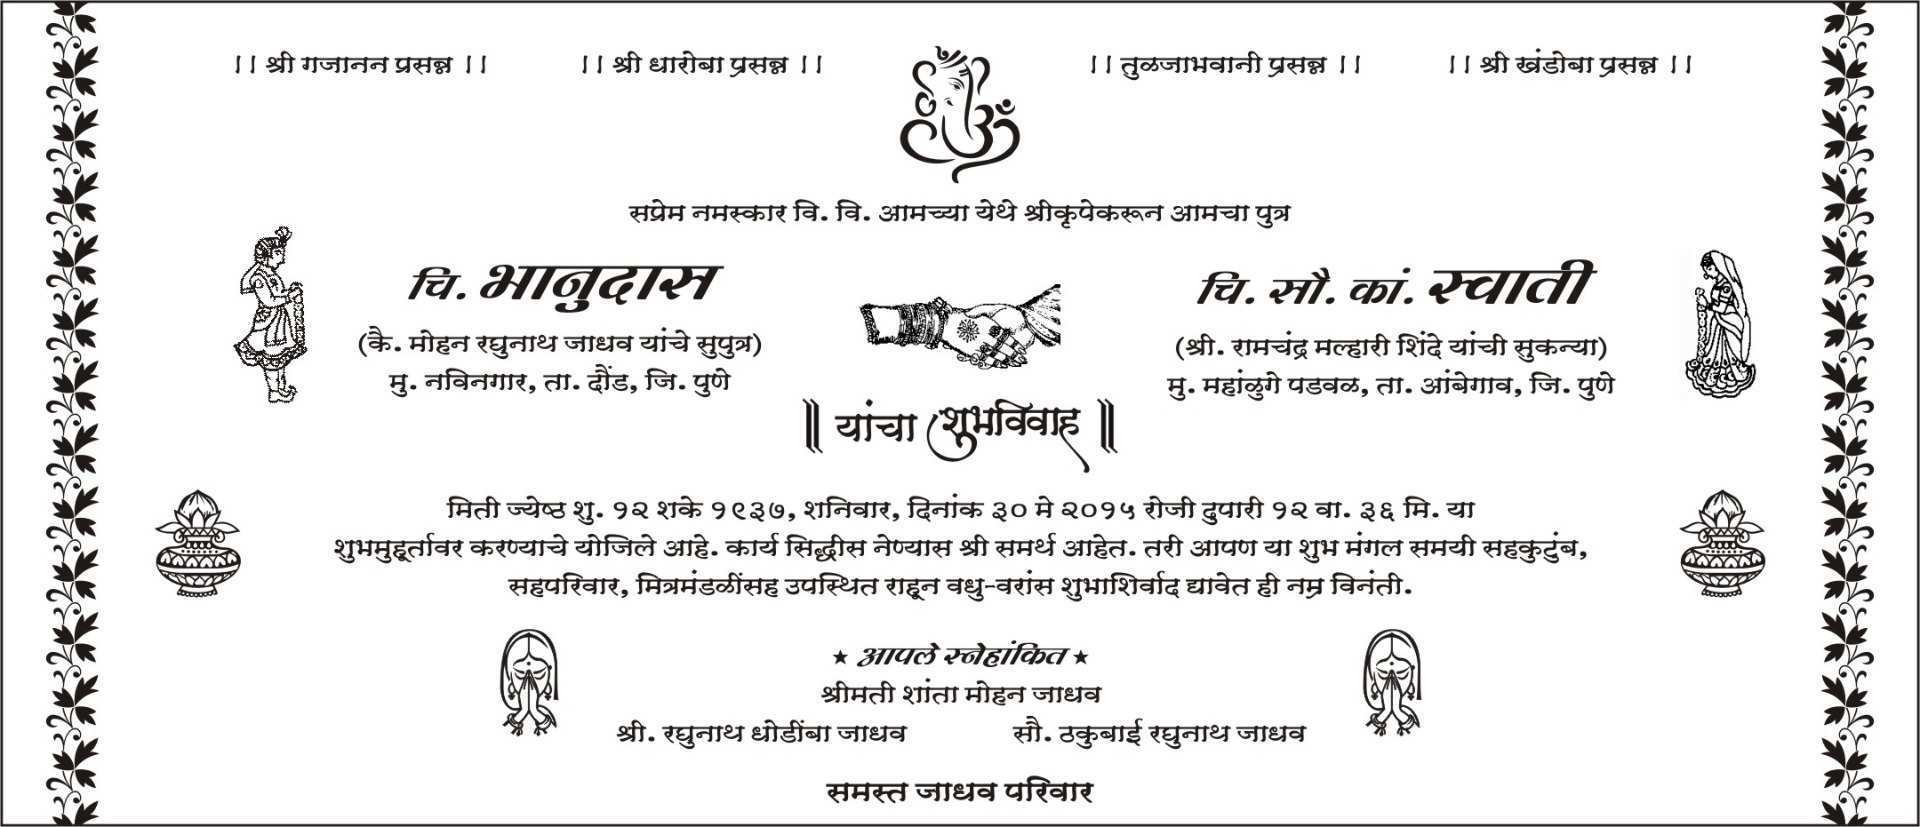 94 Visiting Invitation Card Template Marathi in Word for Invitation Card Template Marathi